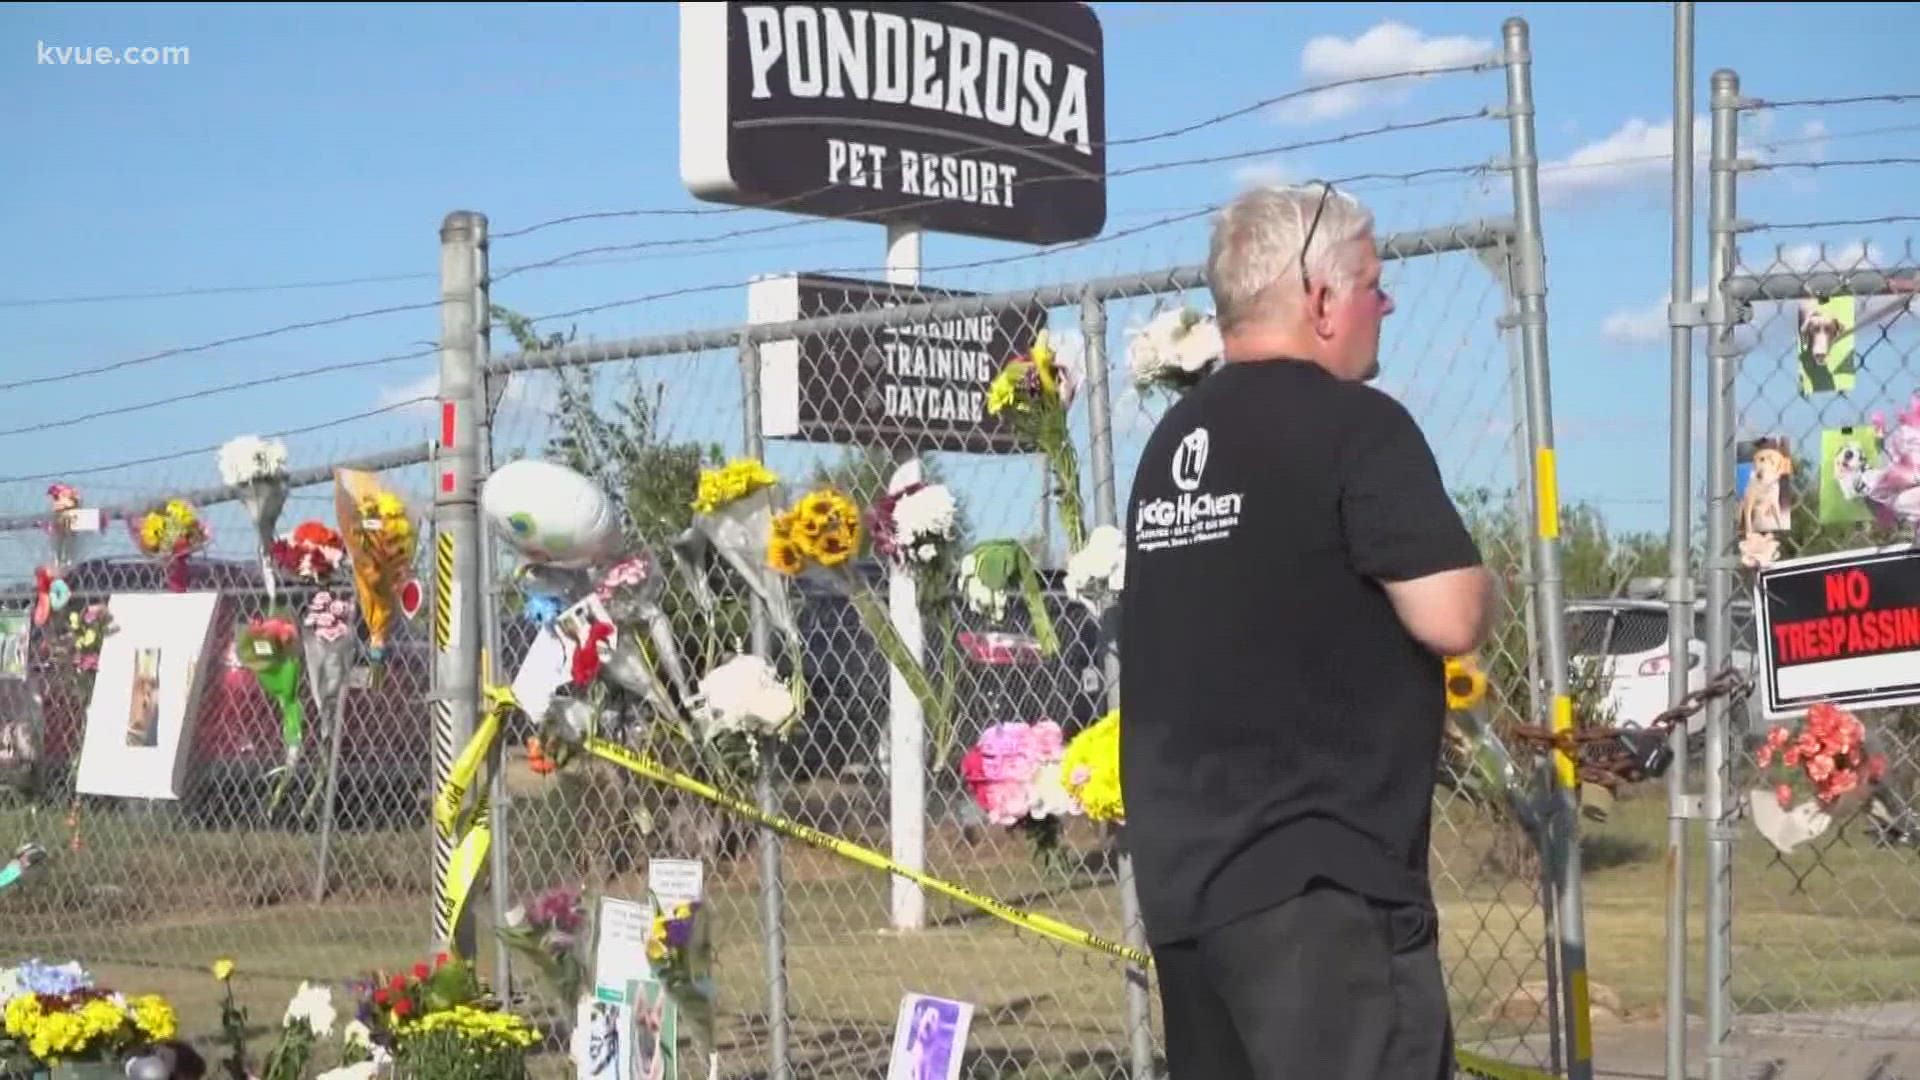 Ponderosa Pet Resort will not be fined for the lack of a kennel permit after the deadly fire that killed 75 dogs, the City of Georgetown said.